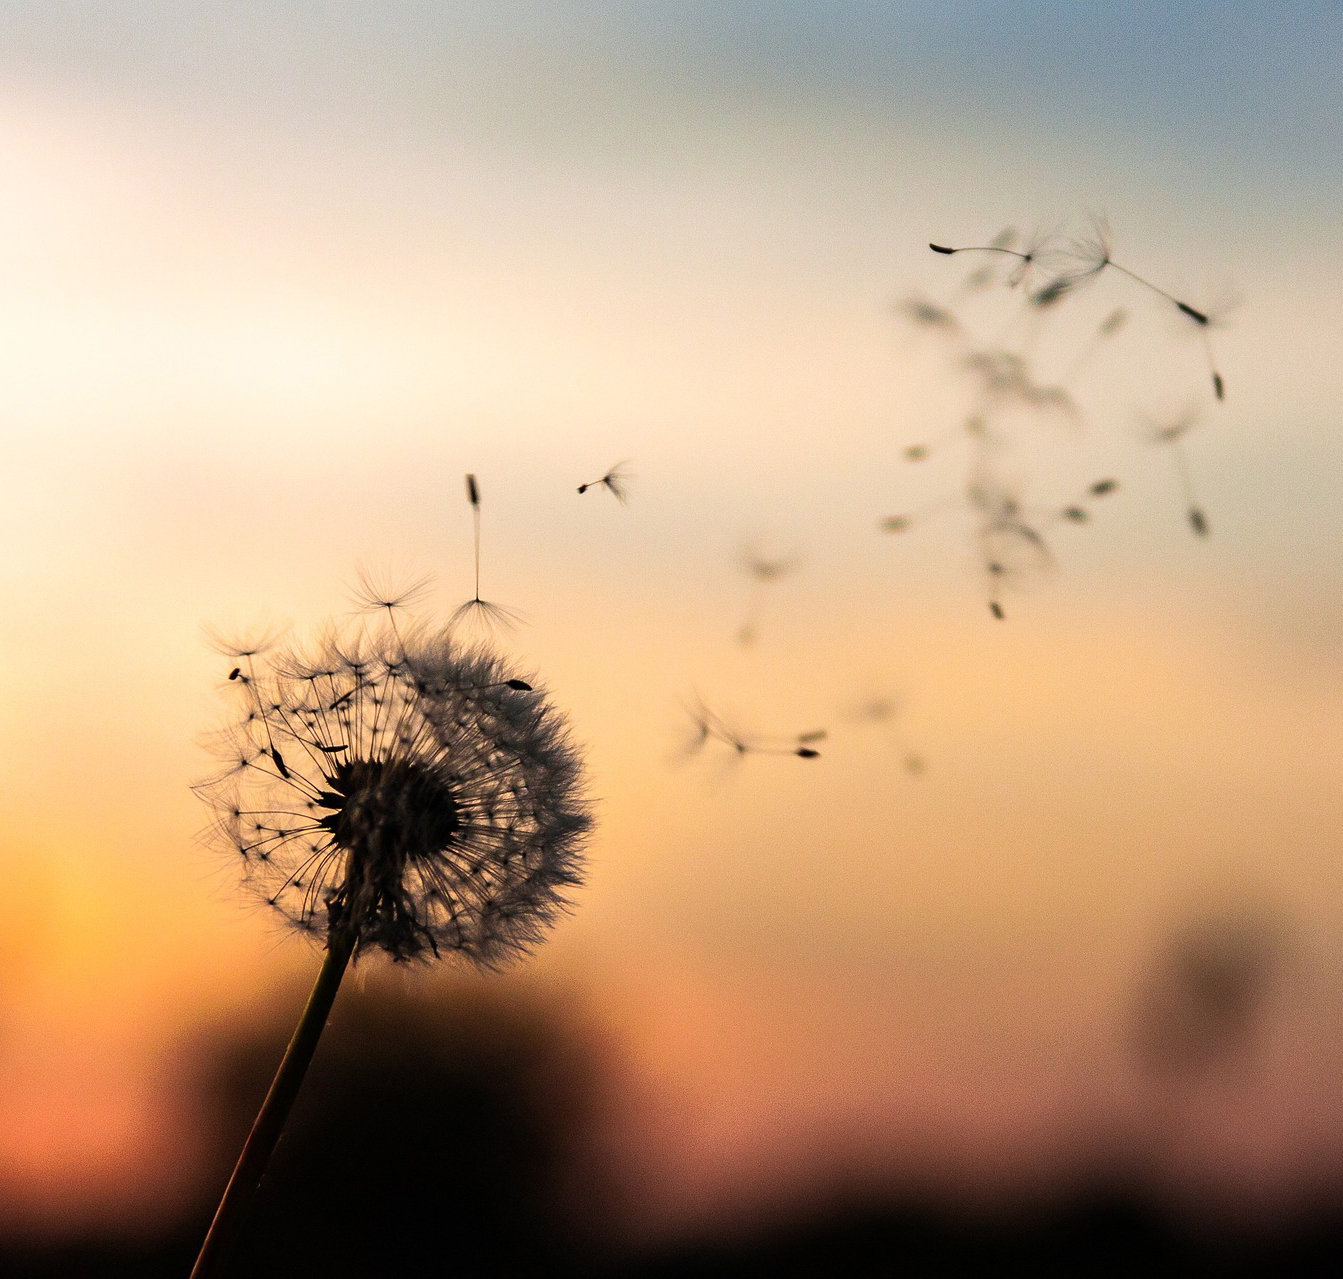 Dandelion clock with seeds blowing away in the breeze against a sunset